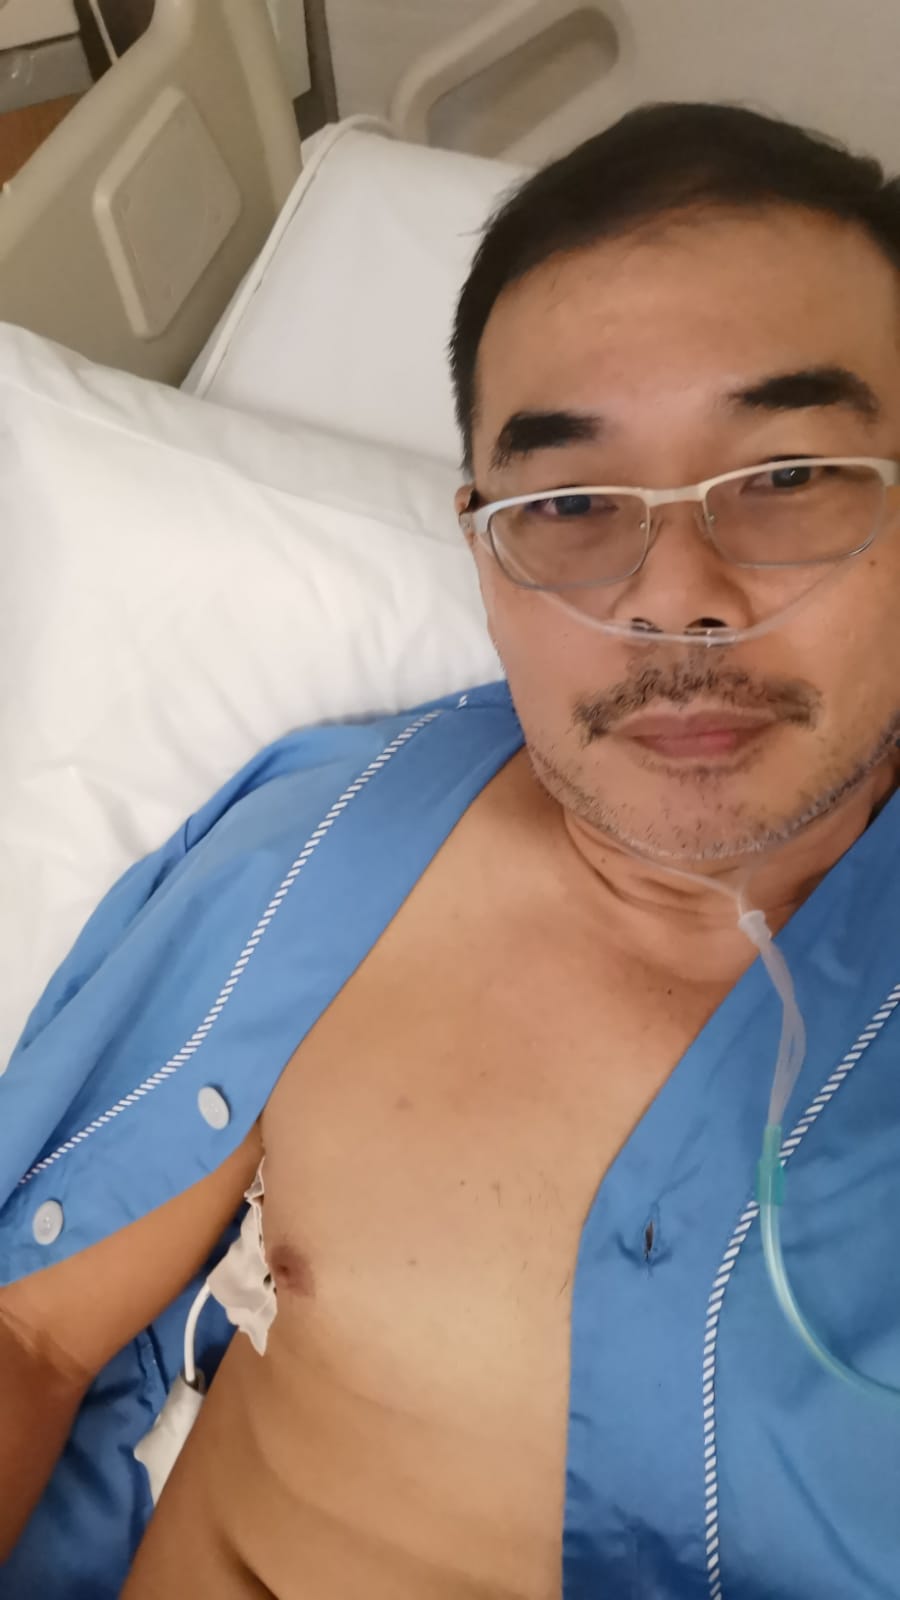 Pang underwent several checks and X-rays at the hospital only to find out that he a broke his collar bone, his 9th rib, and had an air pocket in his lungs. 